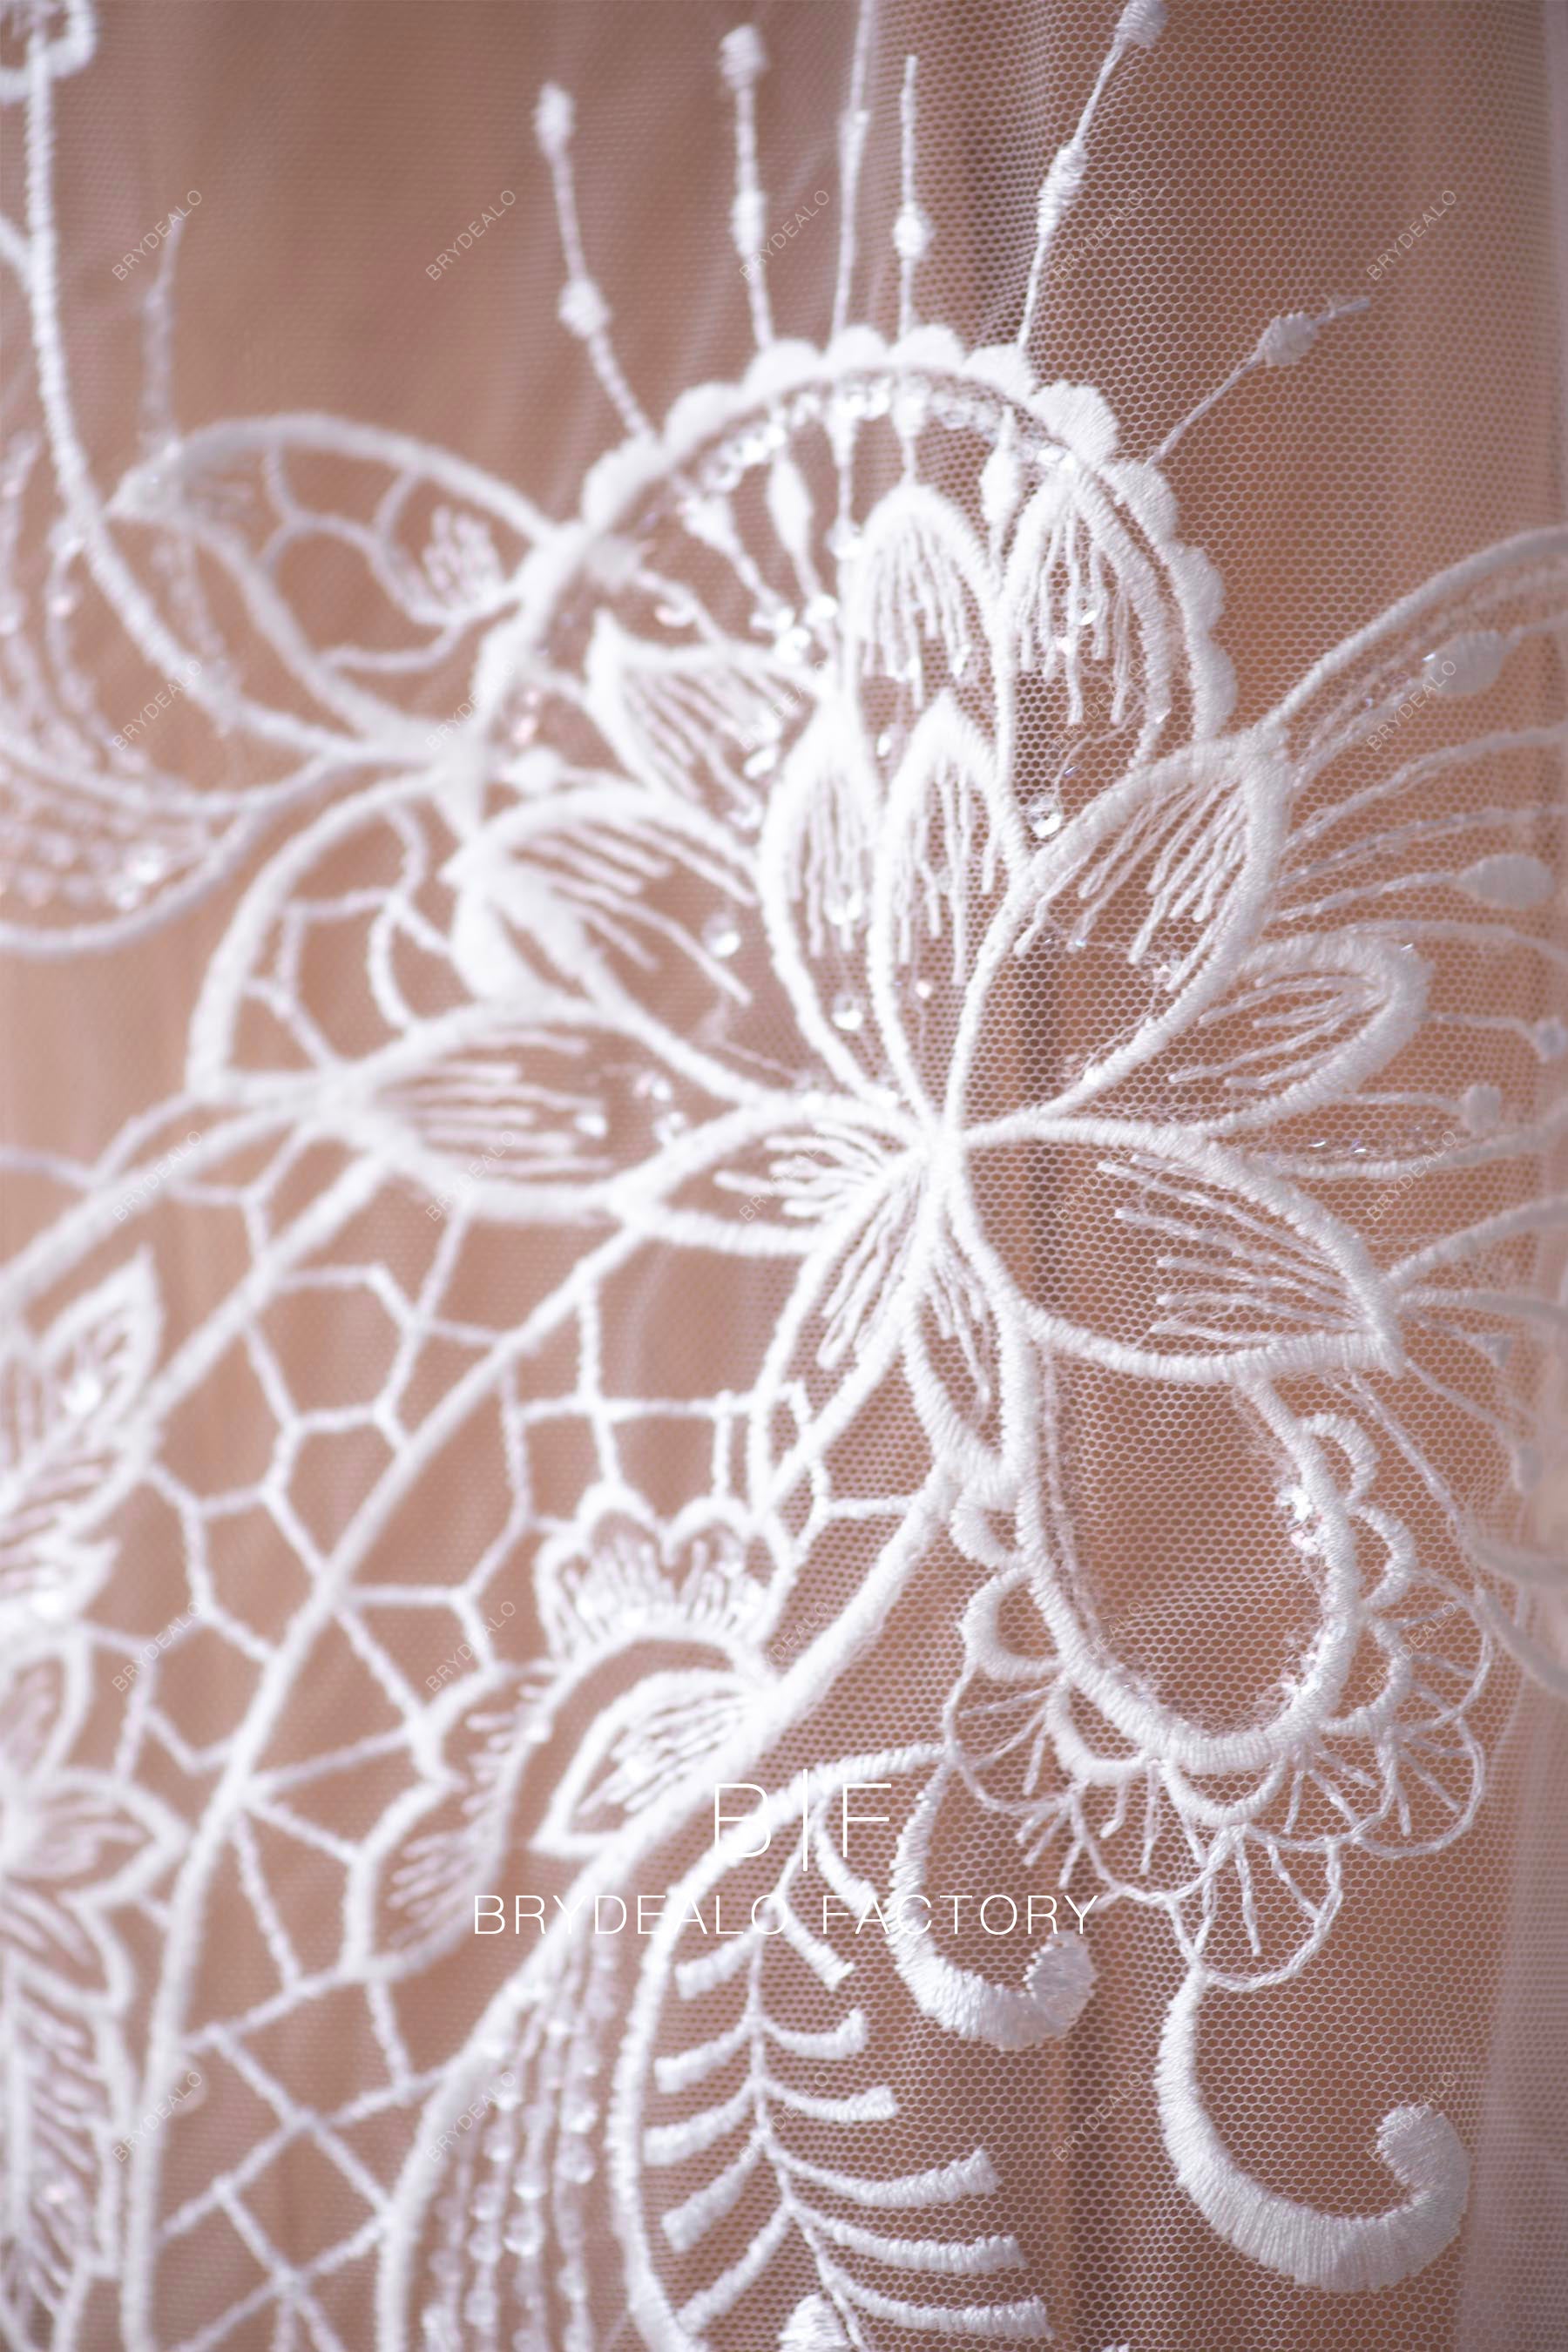 delicate shimmery lace fabric